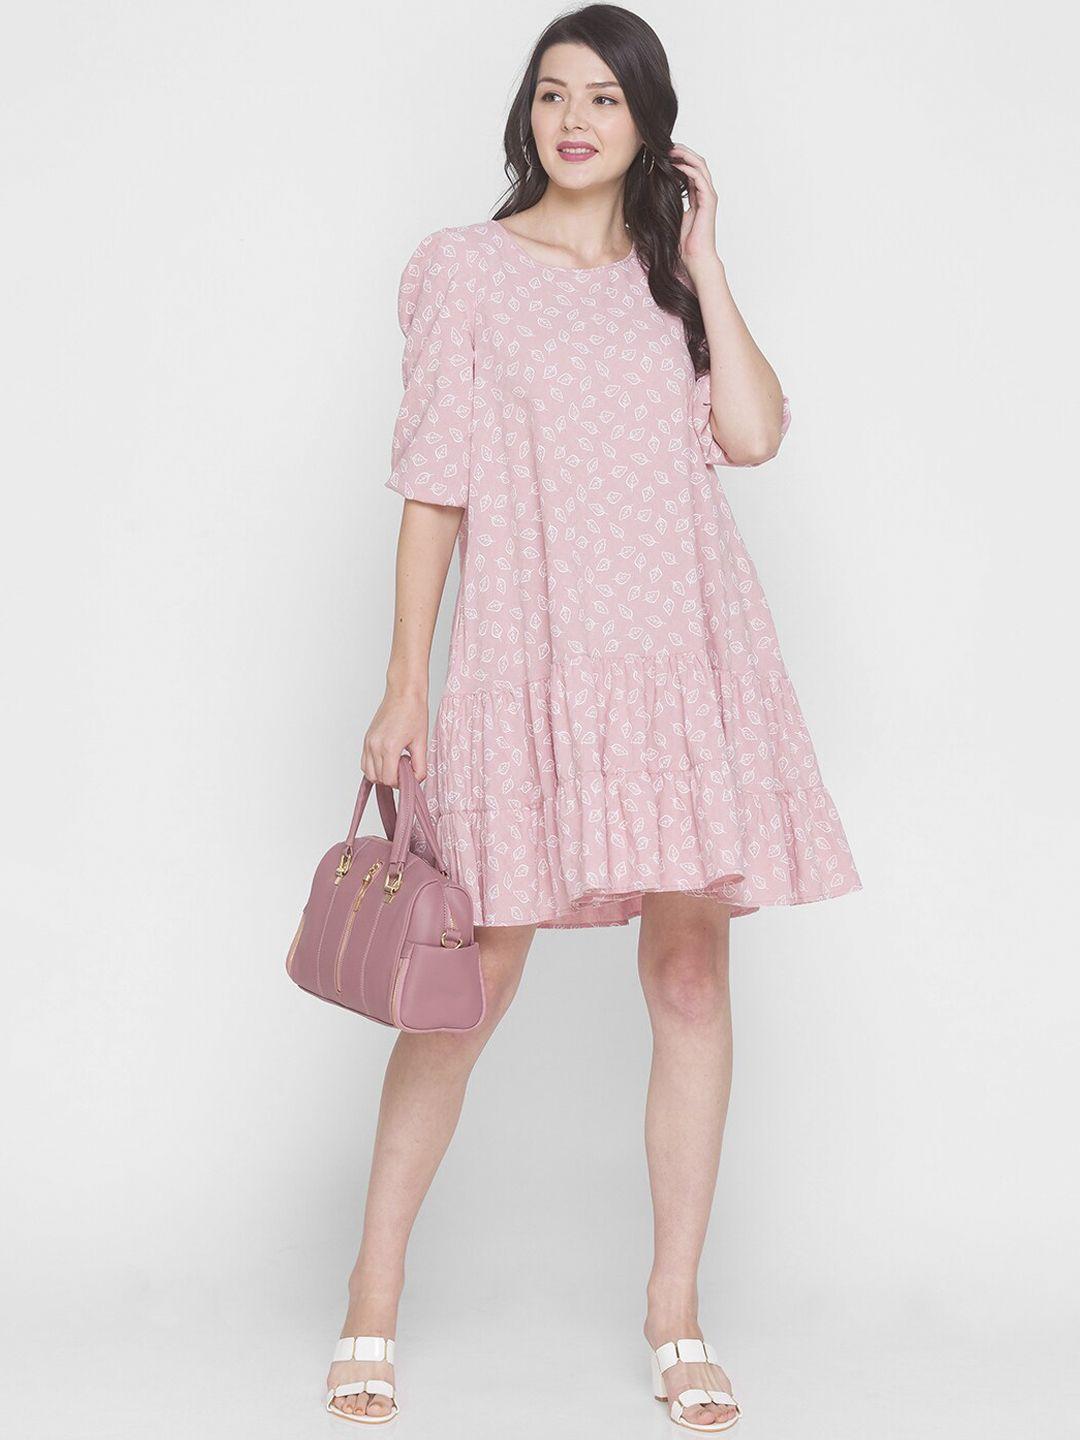 terquois pink floral printed a-line dress